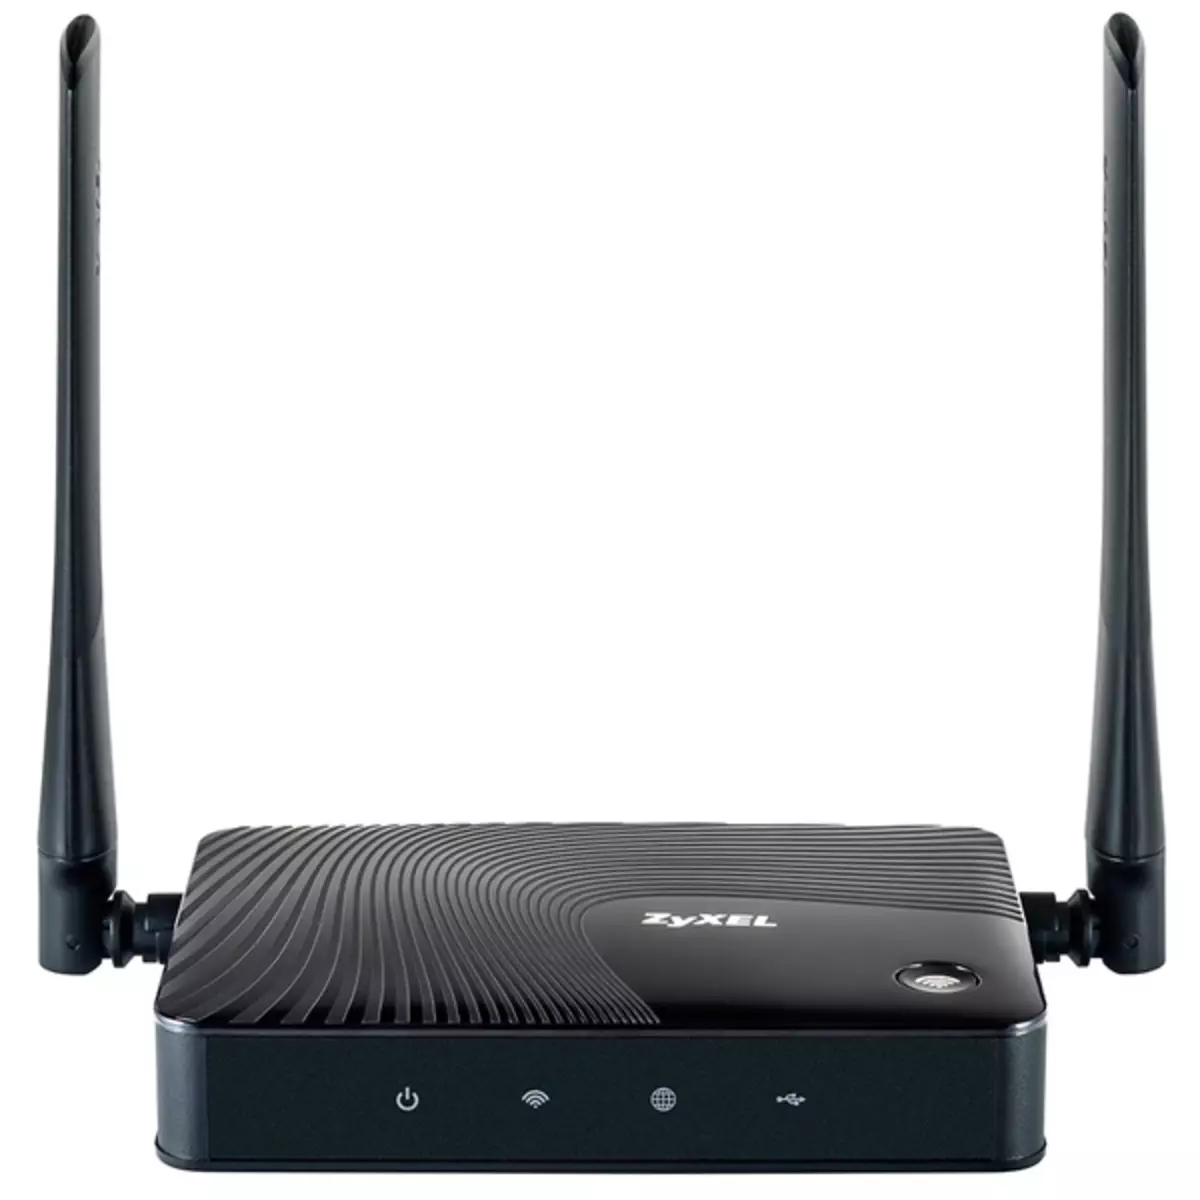 Configure the Zyxel Keenetic 4G router